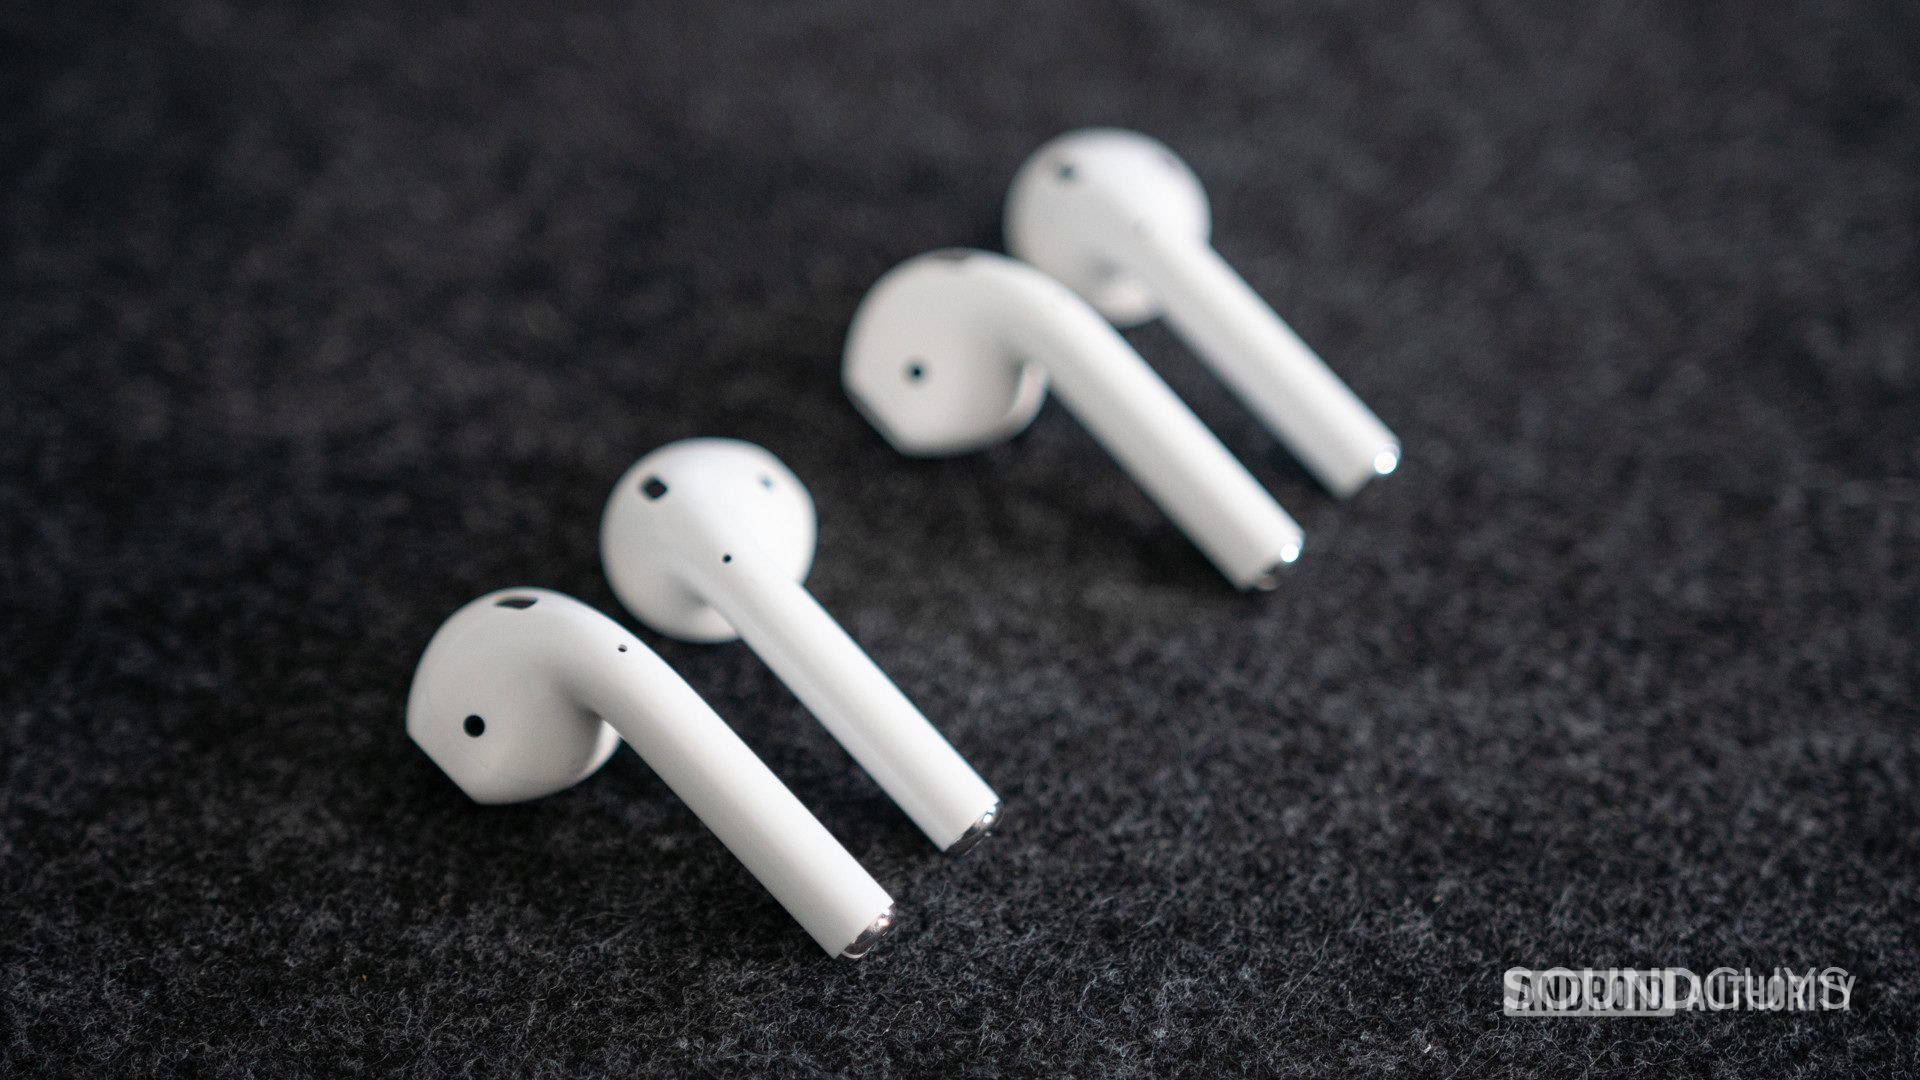 The old and new Apple AirPods (2019) next to each other.